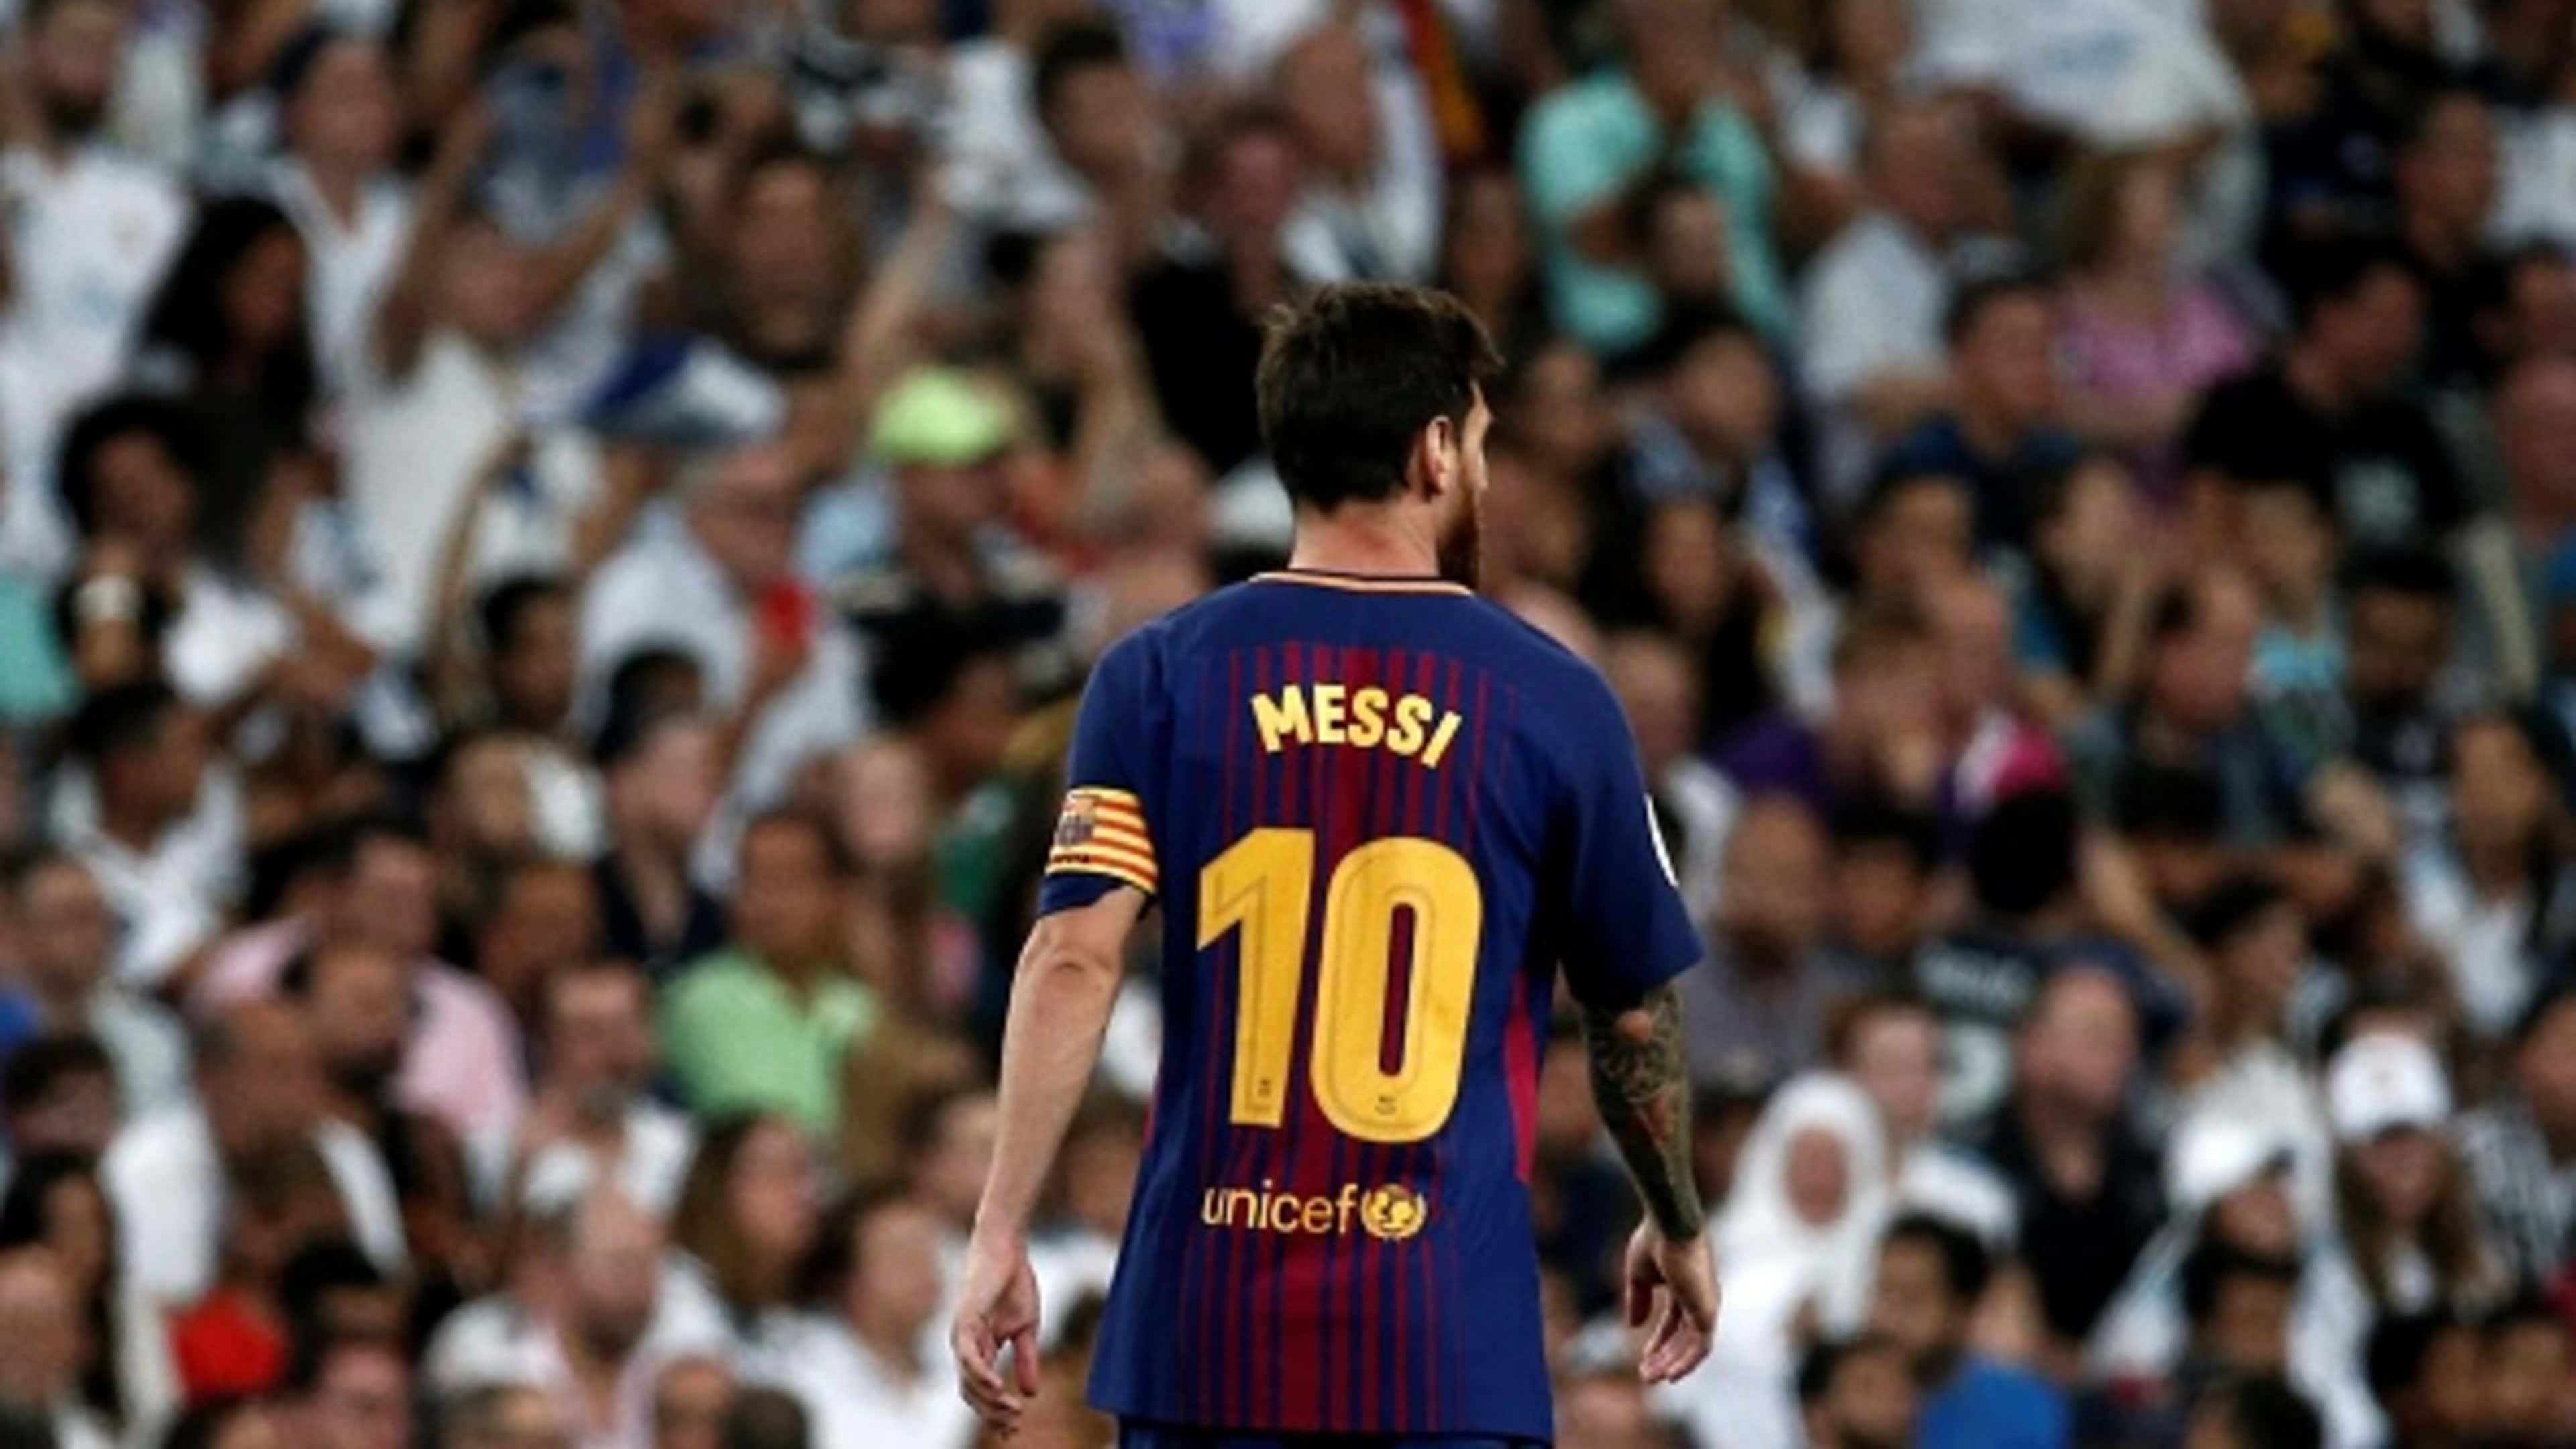 Mainstream Academie comfort Explained: Why Barcelona cannot retire Messi's number 10 jersey - What does  the La Liga rule state? | Goal.com US